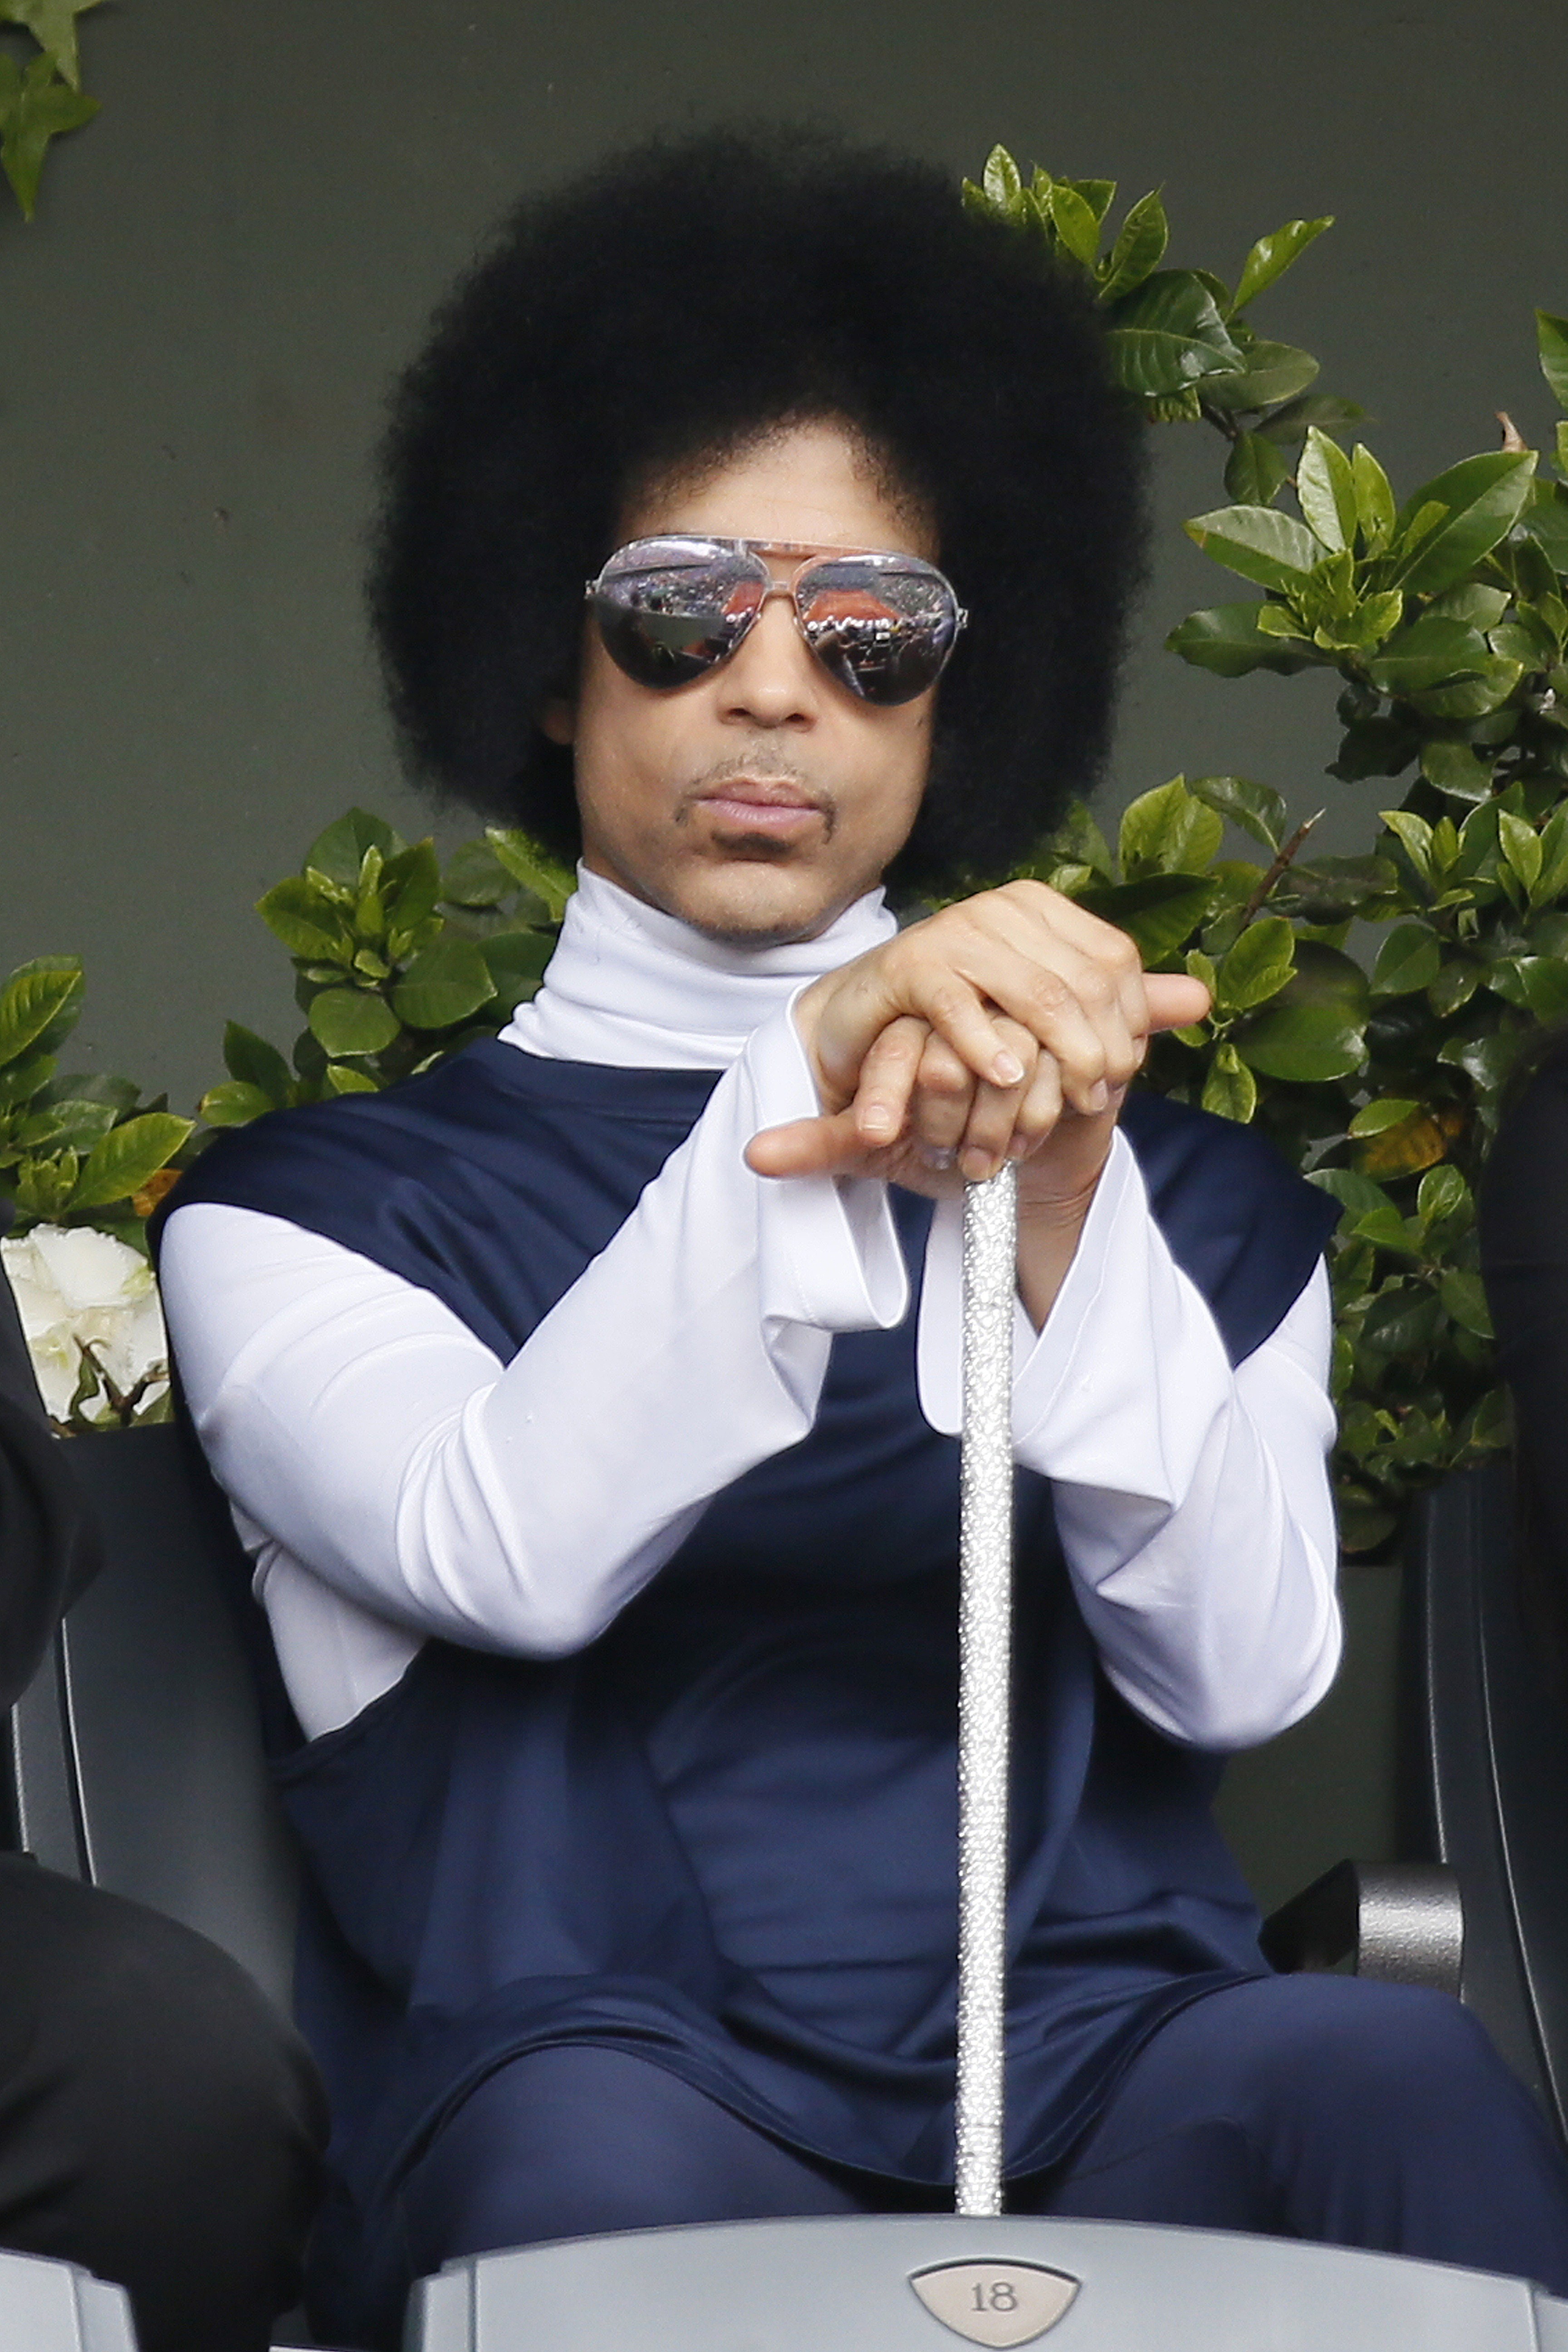 Singer Prince Hosts Exclusive Facebook Q&A, Answers One Question | Time